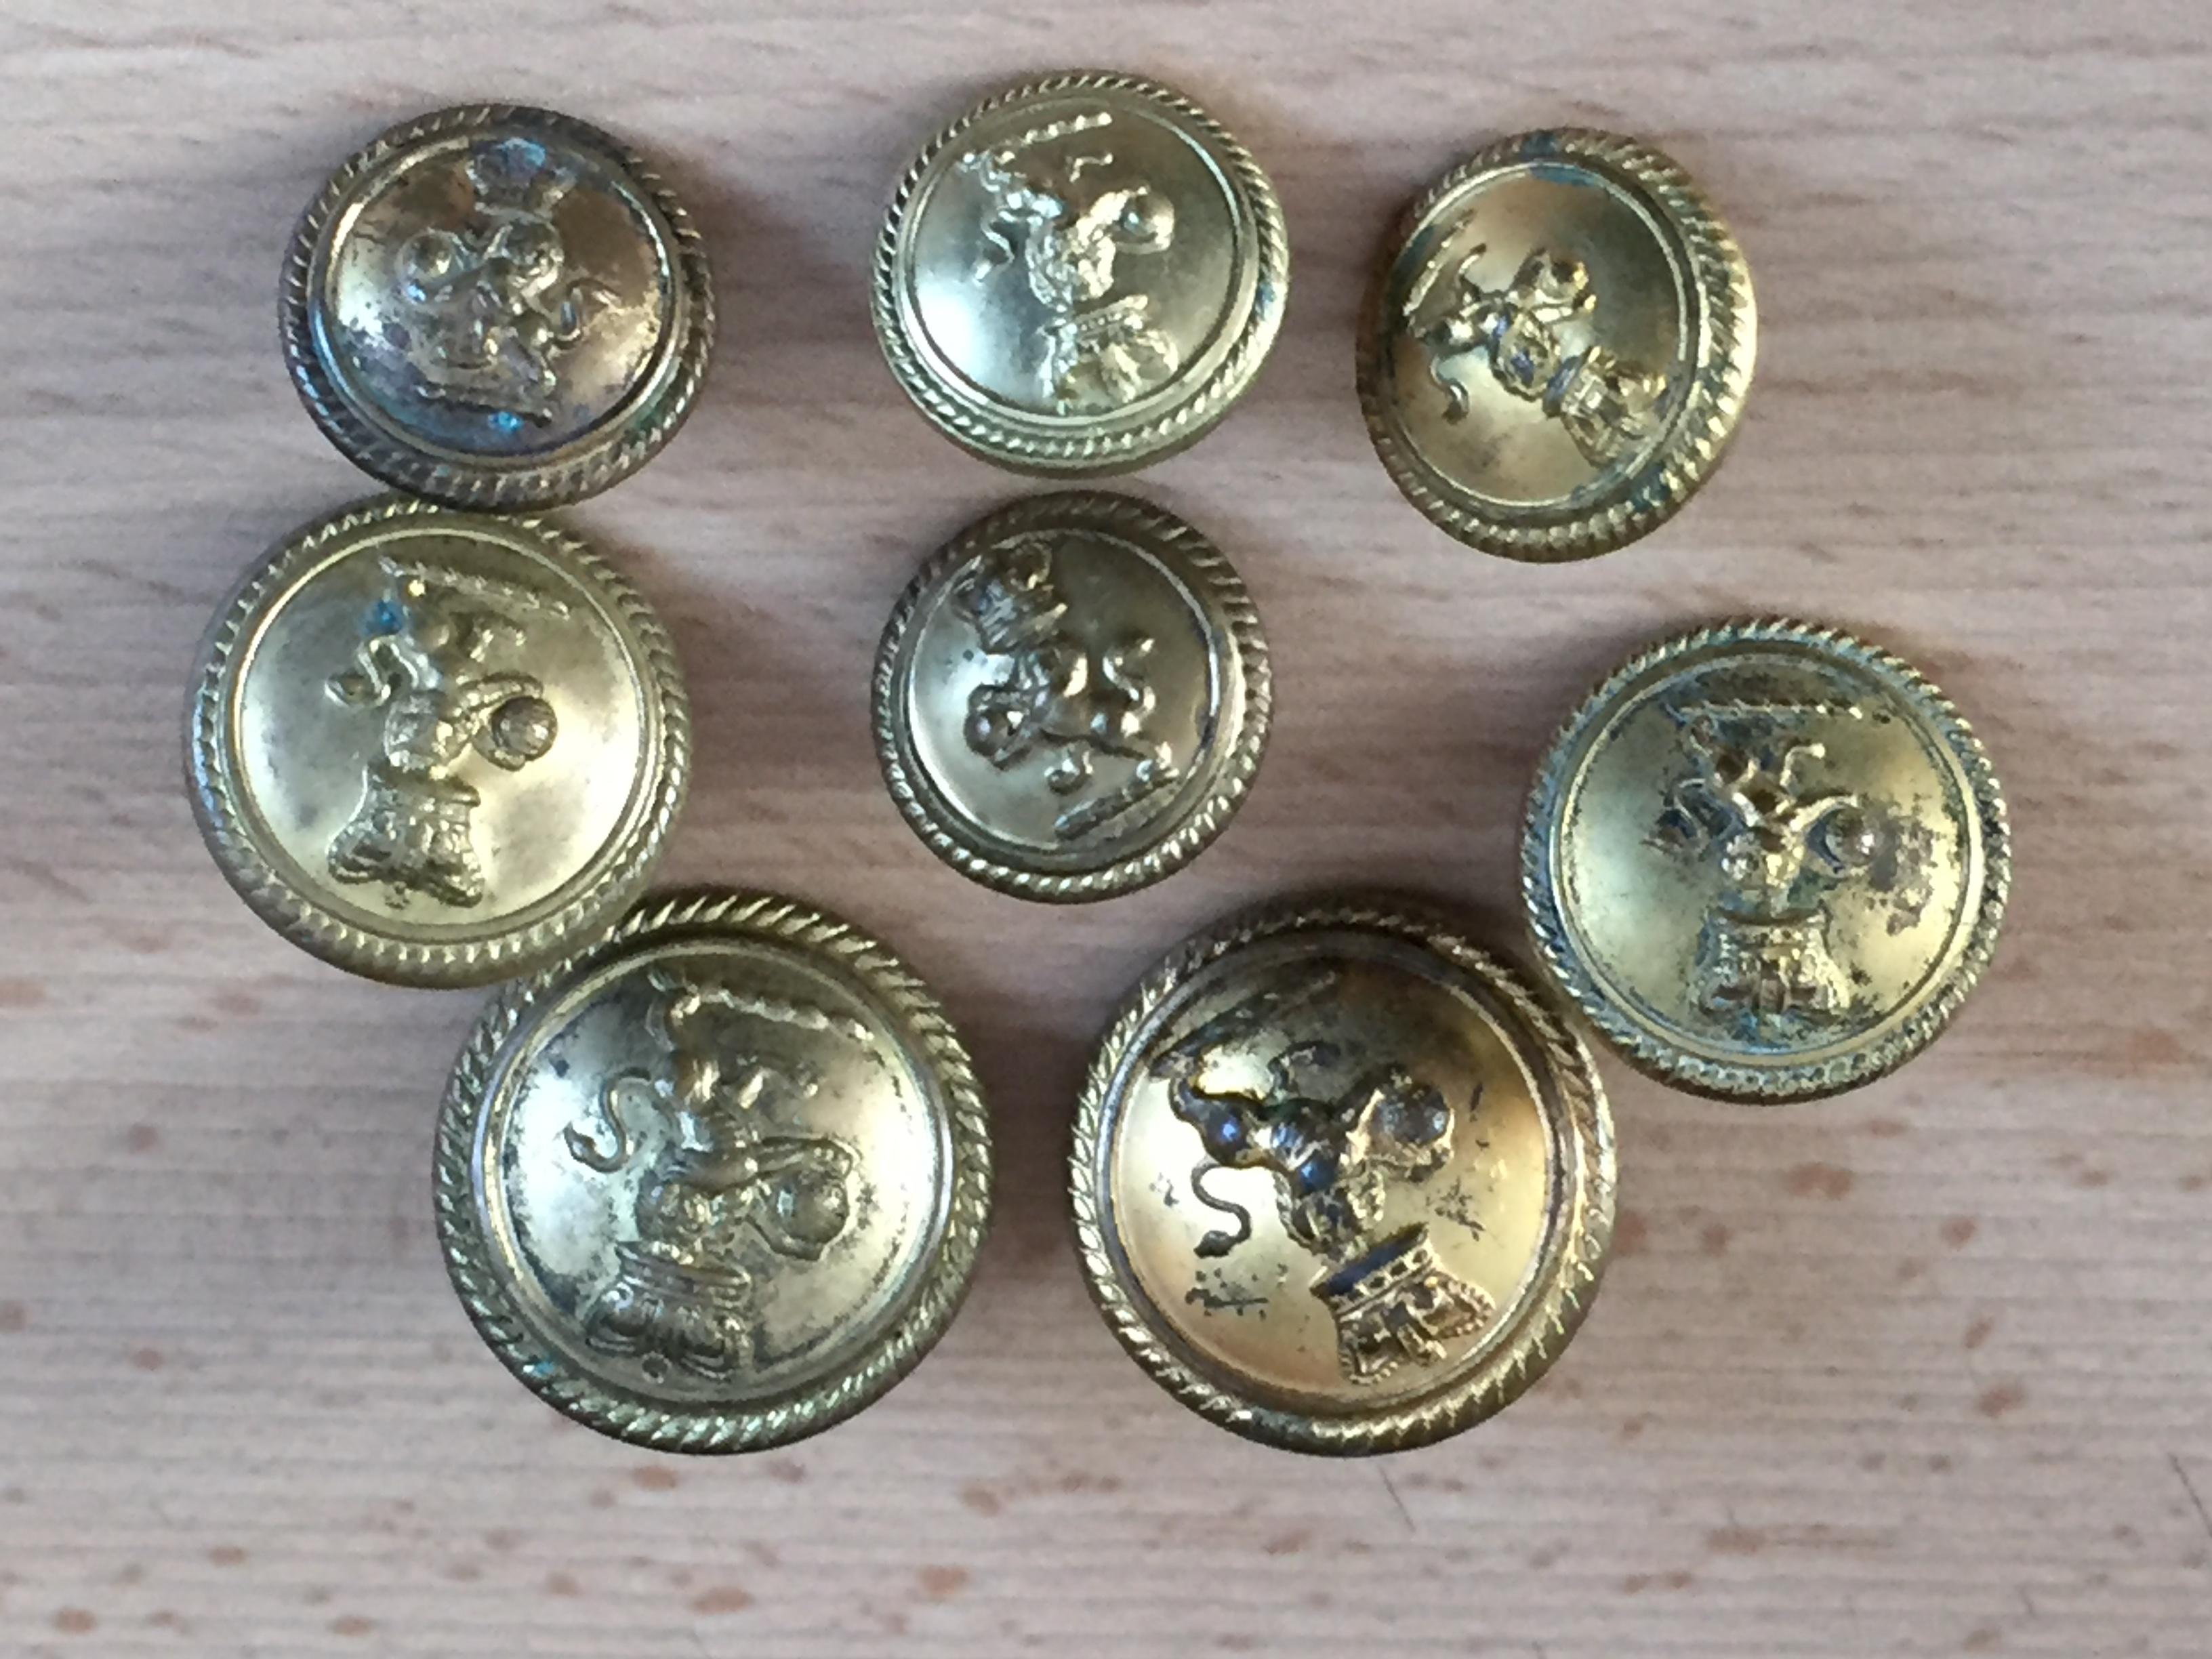 SET OF 6 LARGE AND 3 MEDIUM SIZED BRASS BLAZER AND CUFF MERCHANT NAVAL BUTTONS CIRCA 1950's